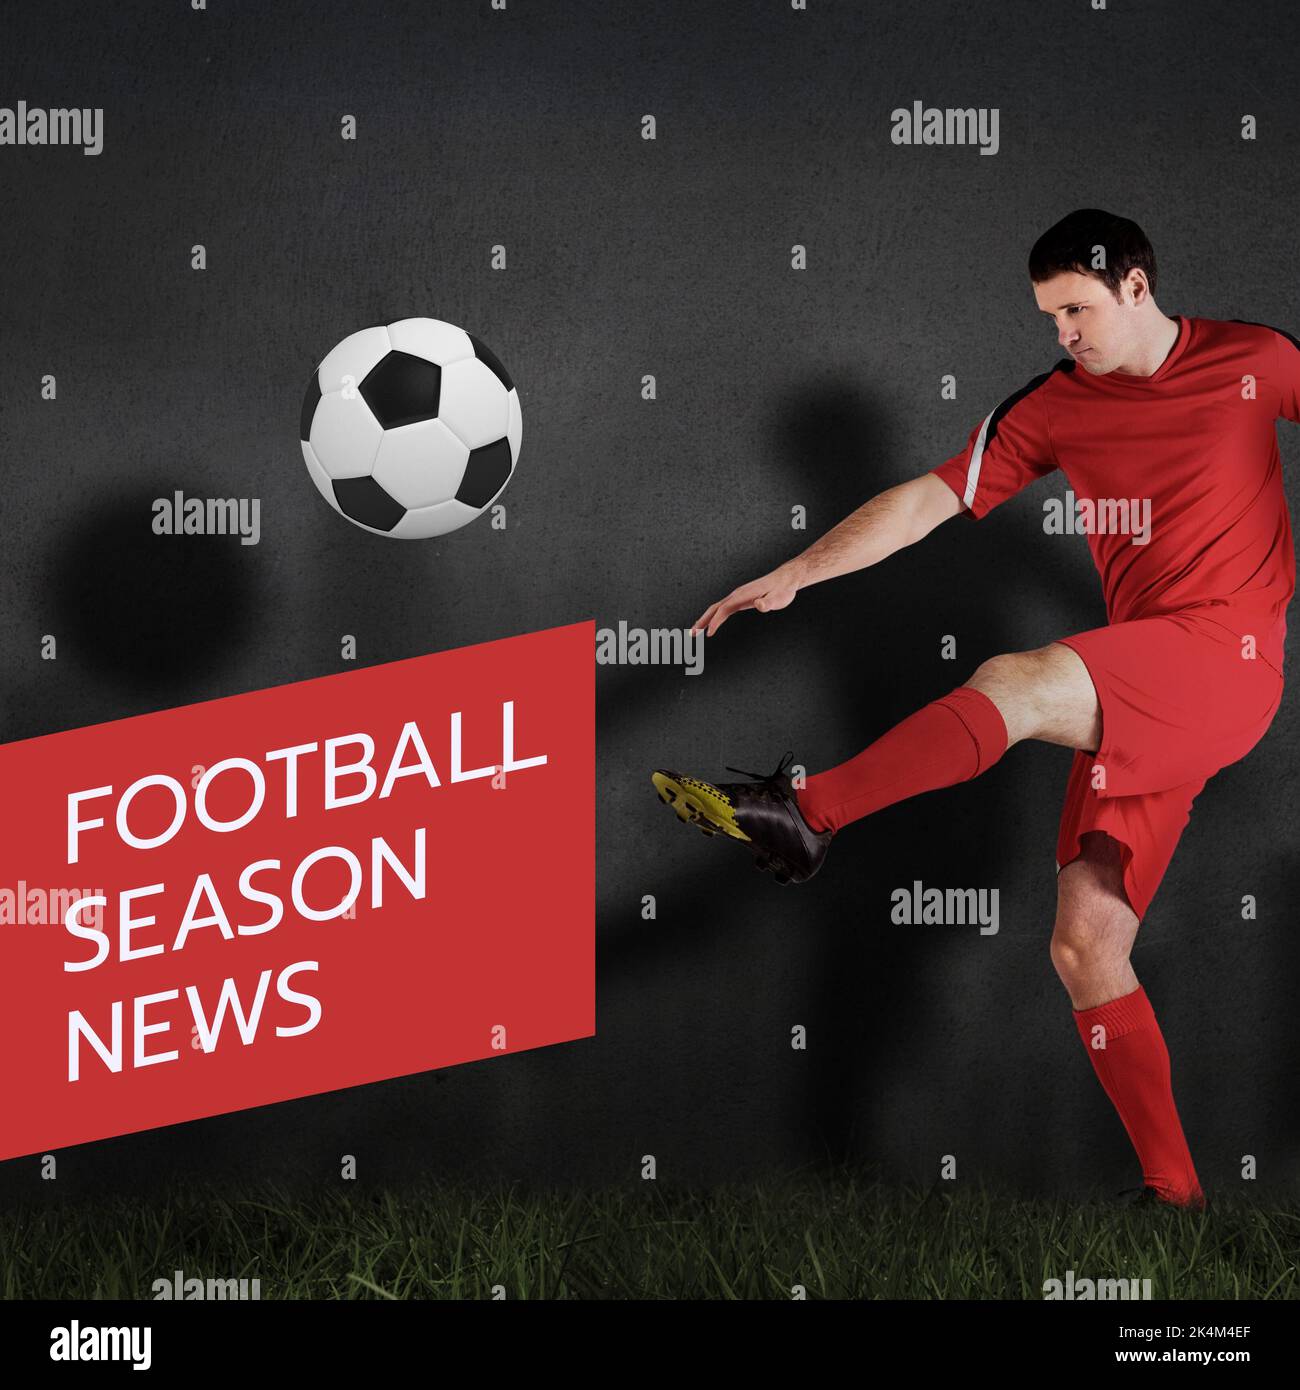 Square image of football season news over caucasian male player with ball Stock Photo